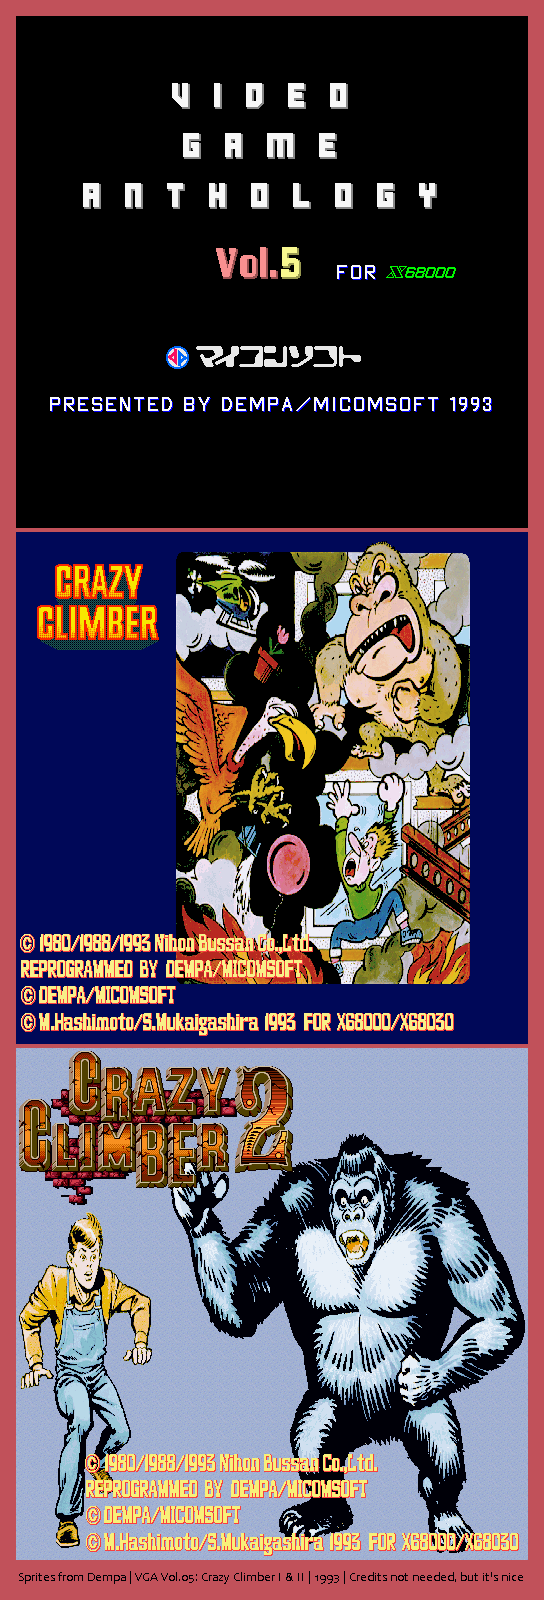 Video Game Anthology Vol.05: Crazy Climber 1 & 2 - Loading Screens